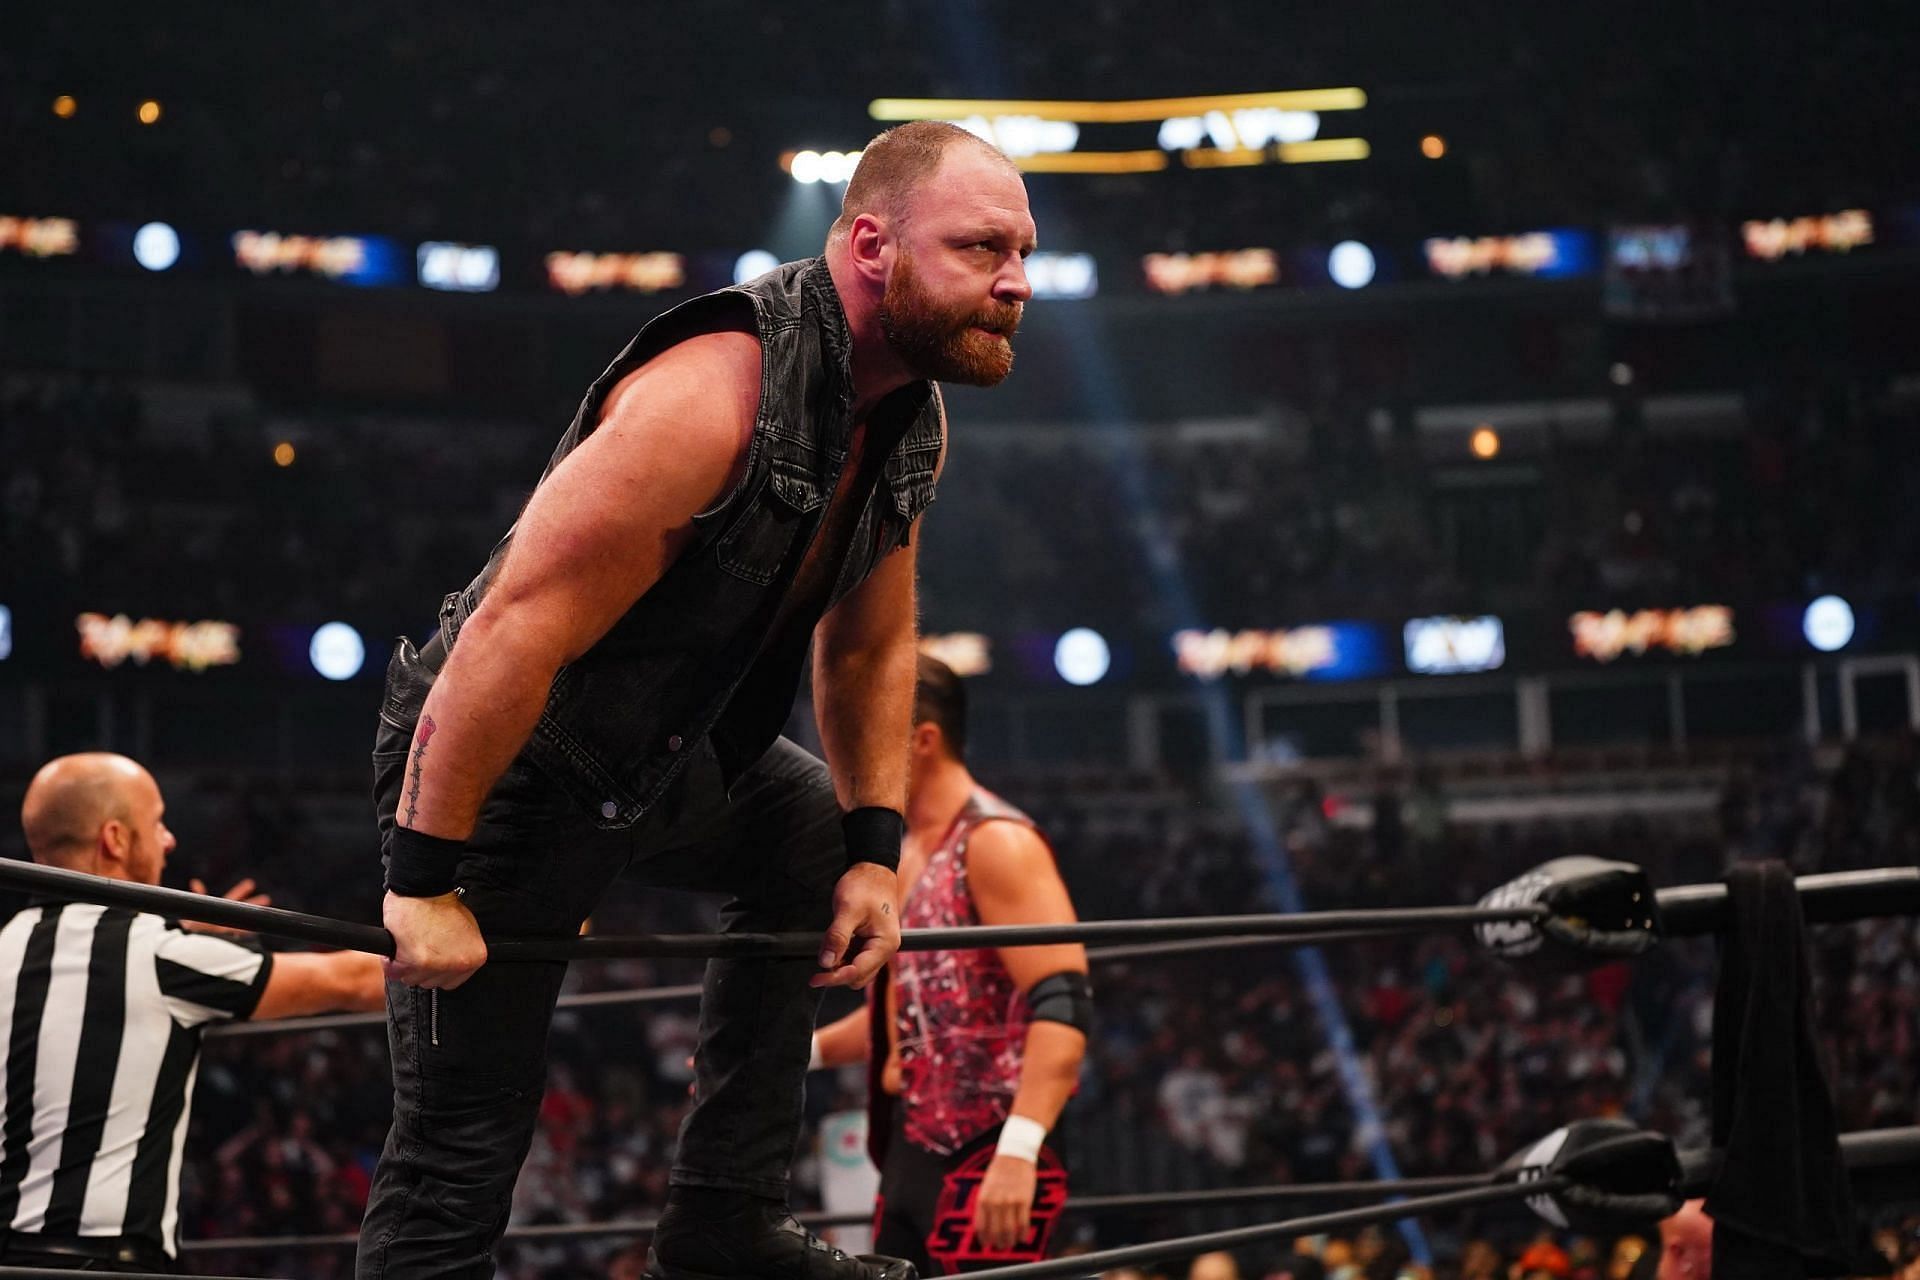 Fans and colleagues are firmly behind Jon Moxley as he attempts to slay his personal demons